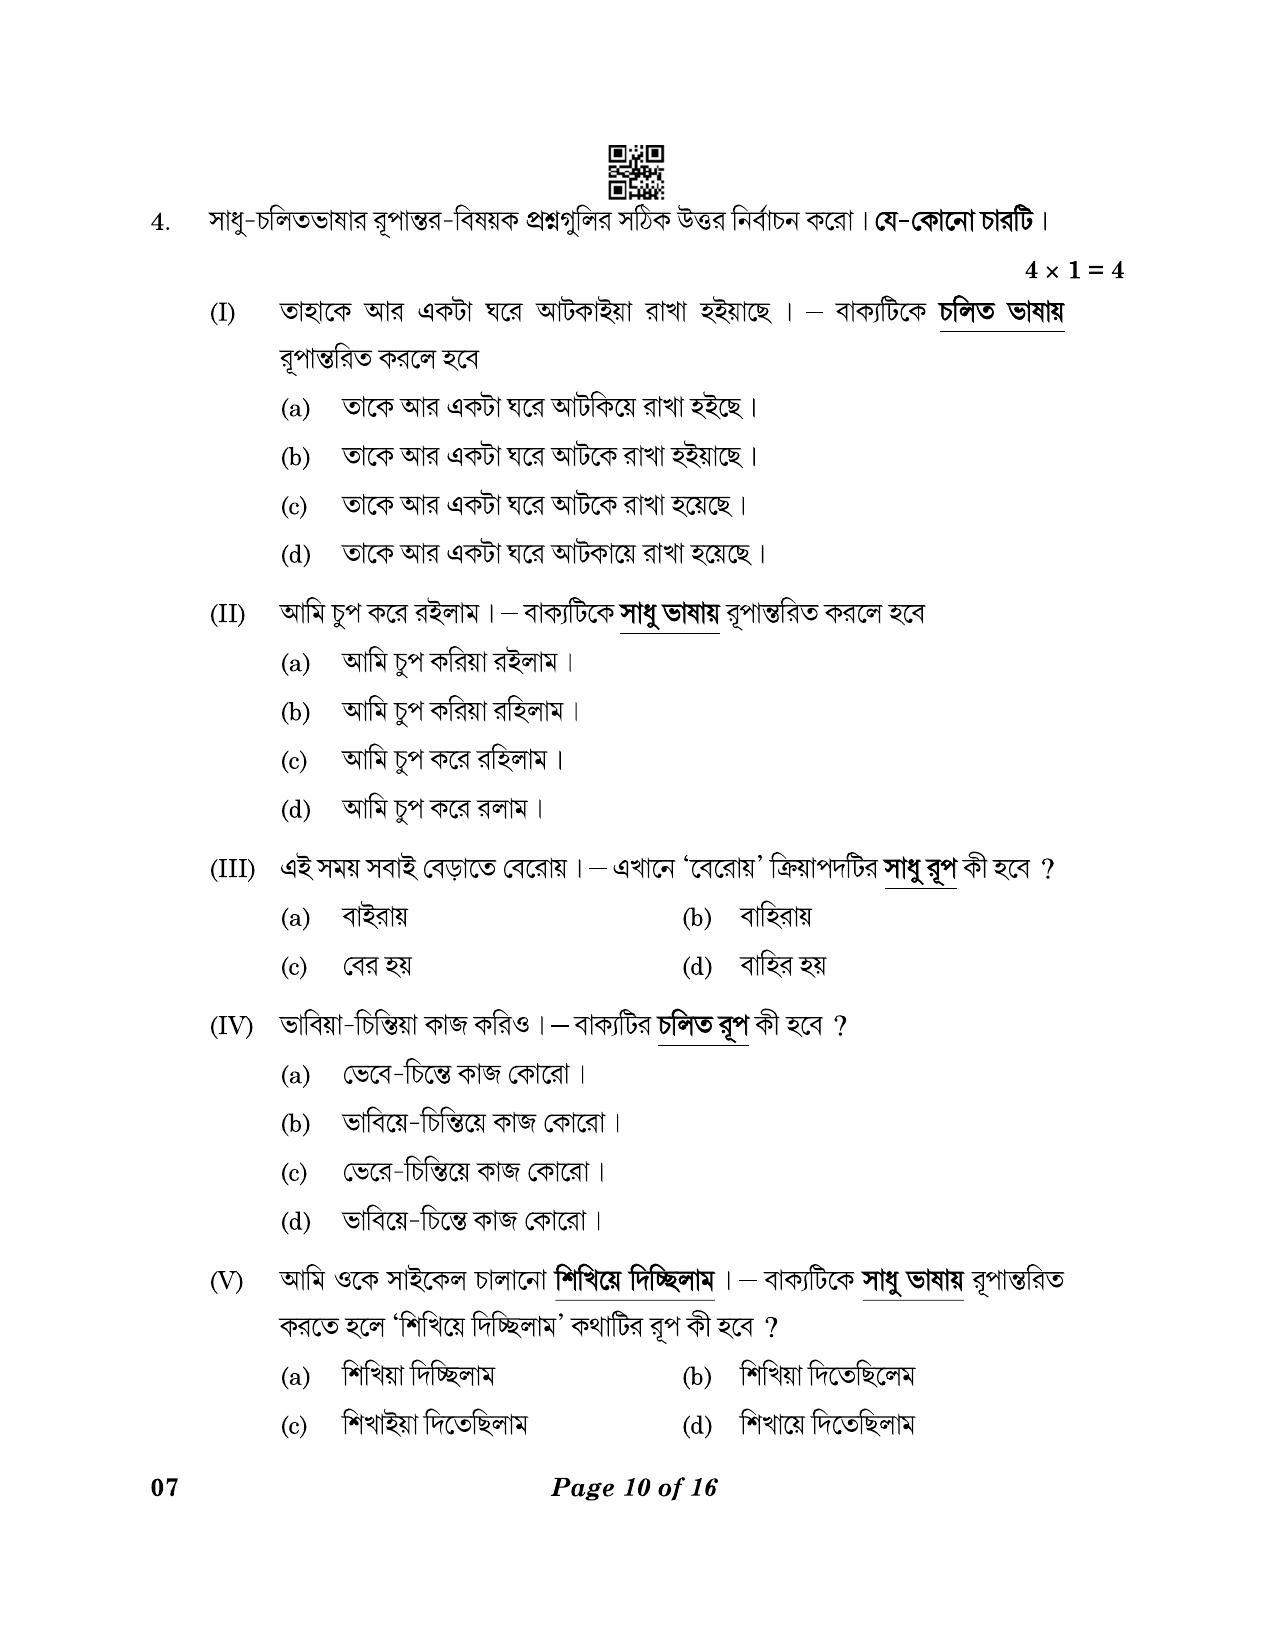 CBSE Class 10 07_Bengali 2023 Question Paper - Page 10